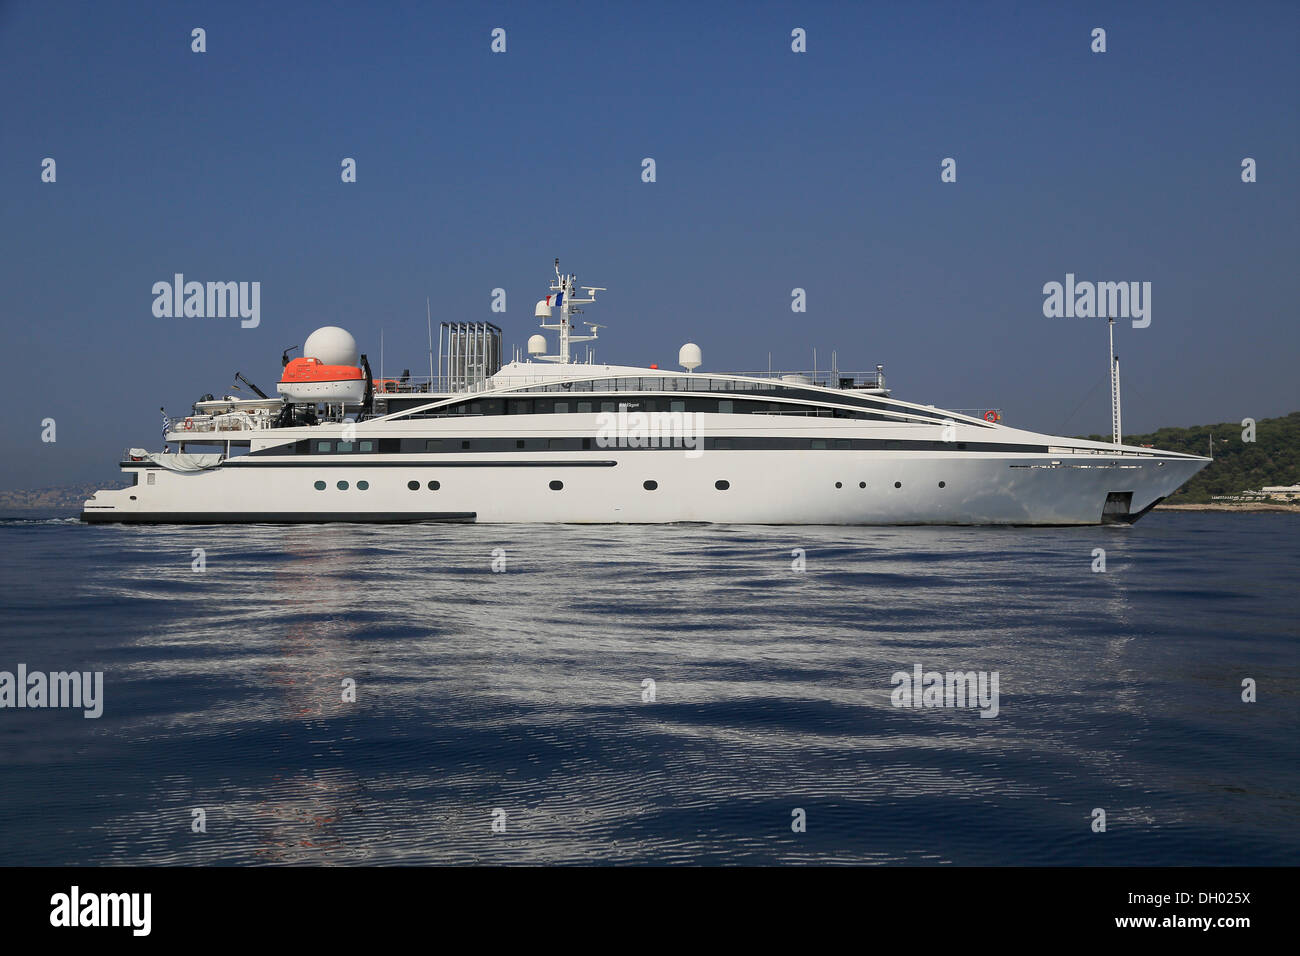 RM Elegant, a cruiser built by Kanellos Bros, length: 72.48 m, built in 2005, off Cap Ferrat, French Riviera, France Stock Photo